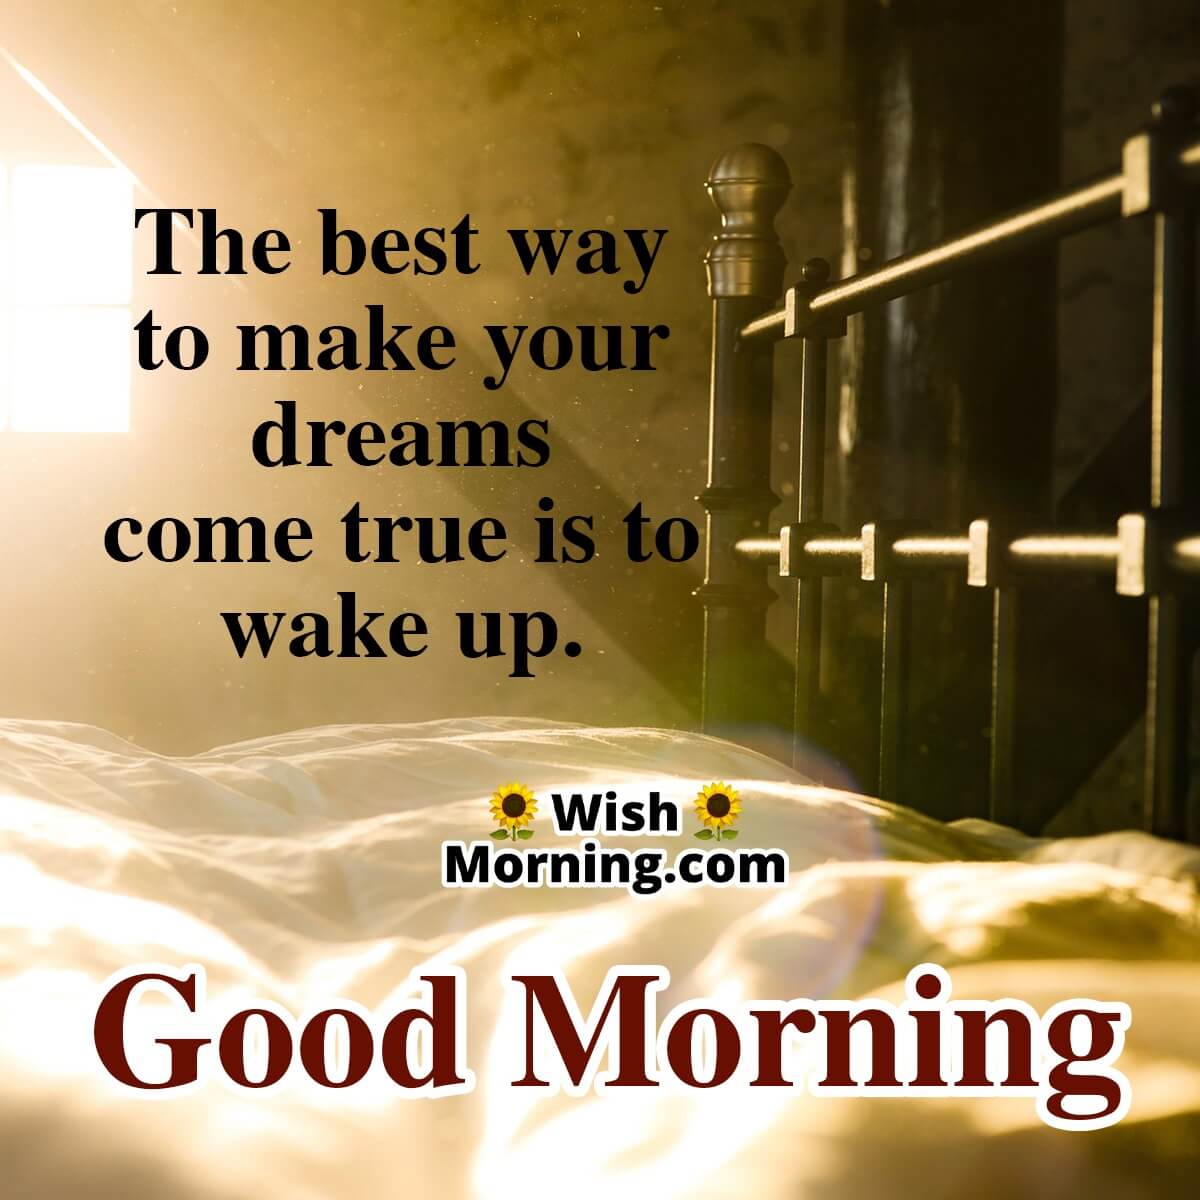 English Good Morning Tuesday Positive Quotes n Text Messages - Good Morning  Wishes and Images